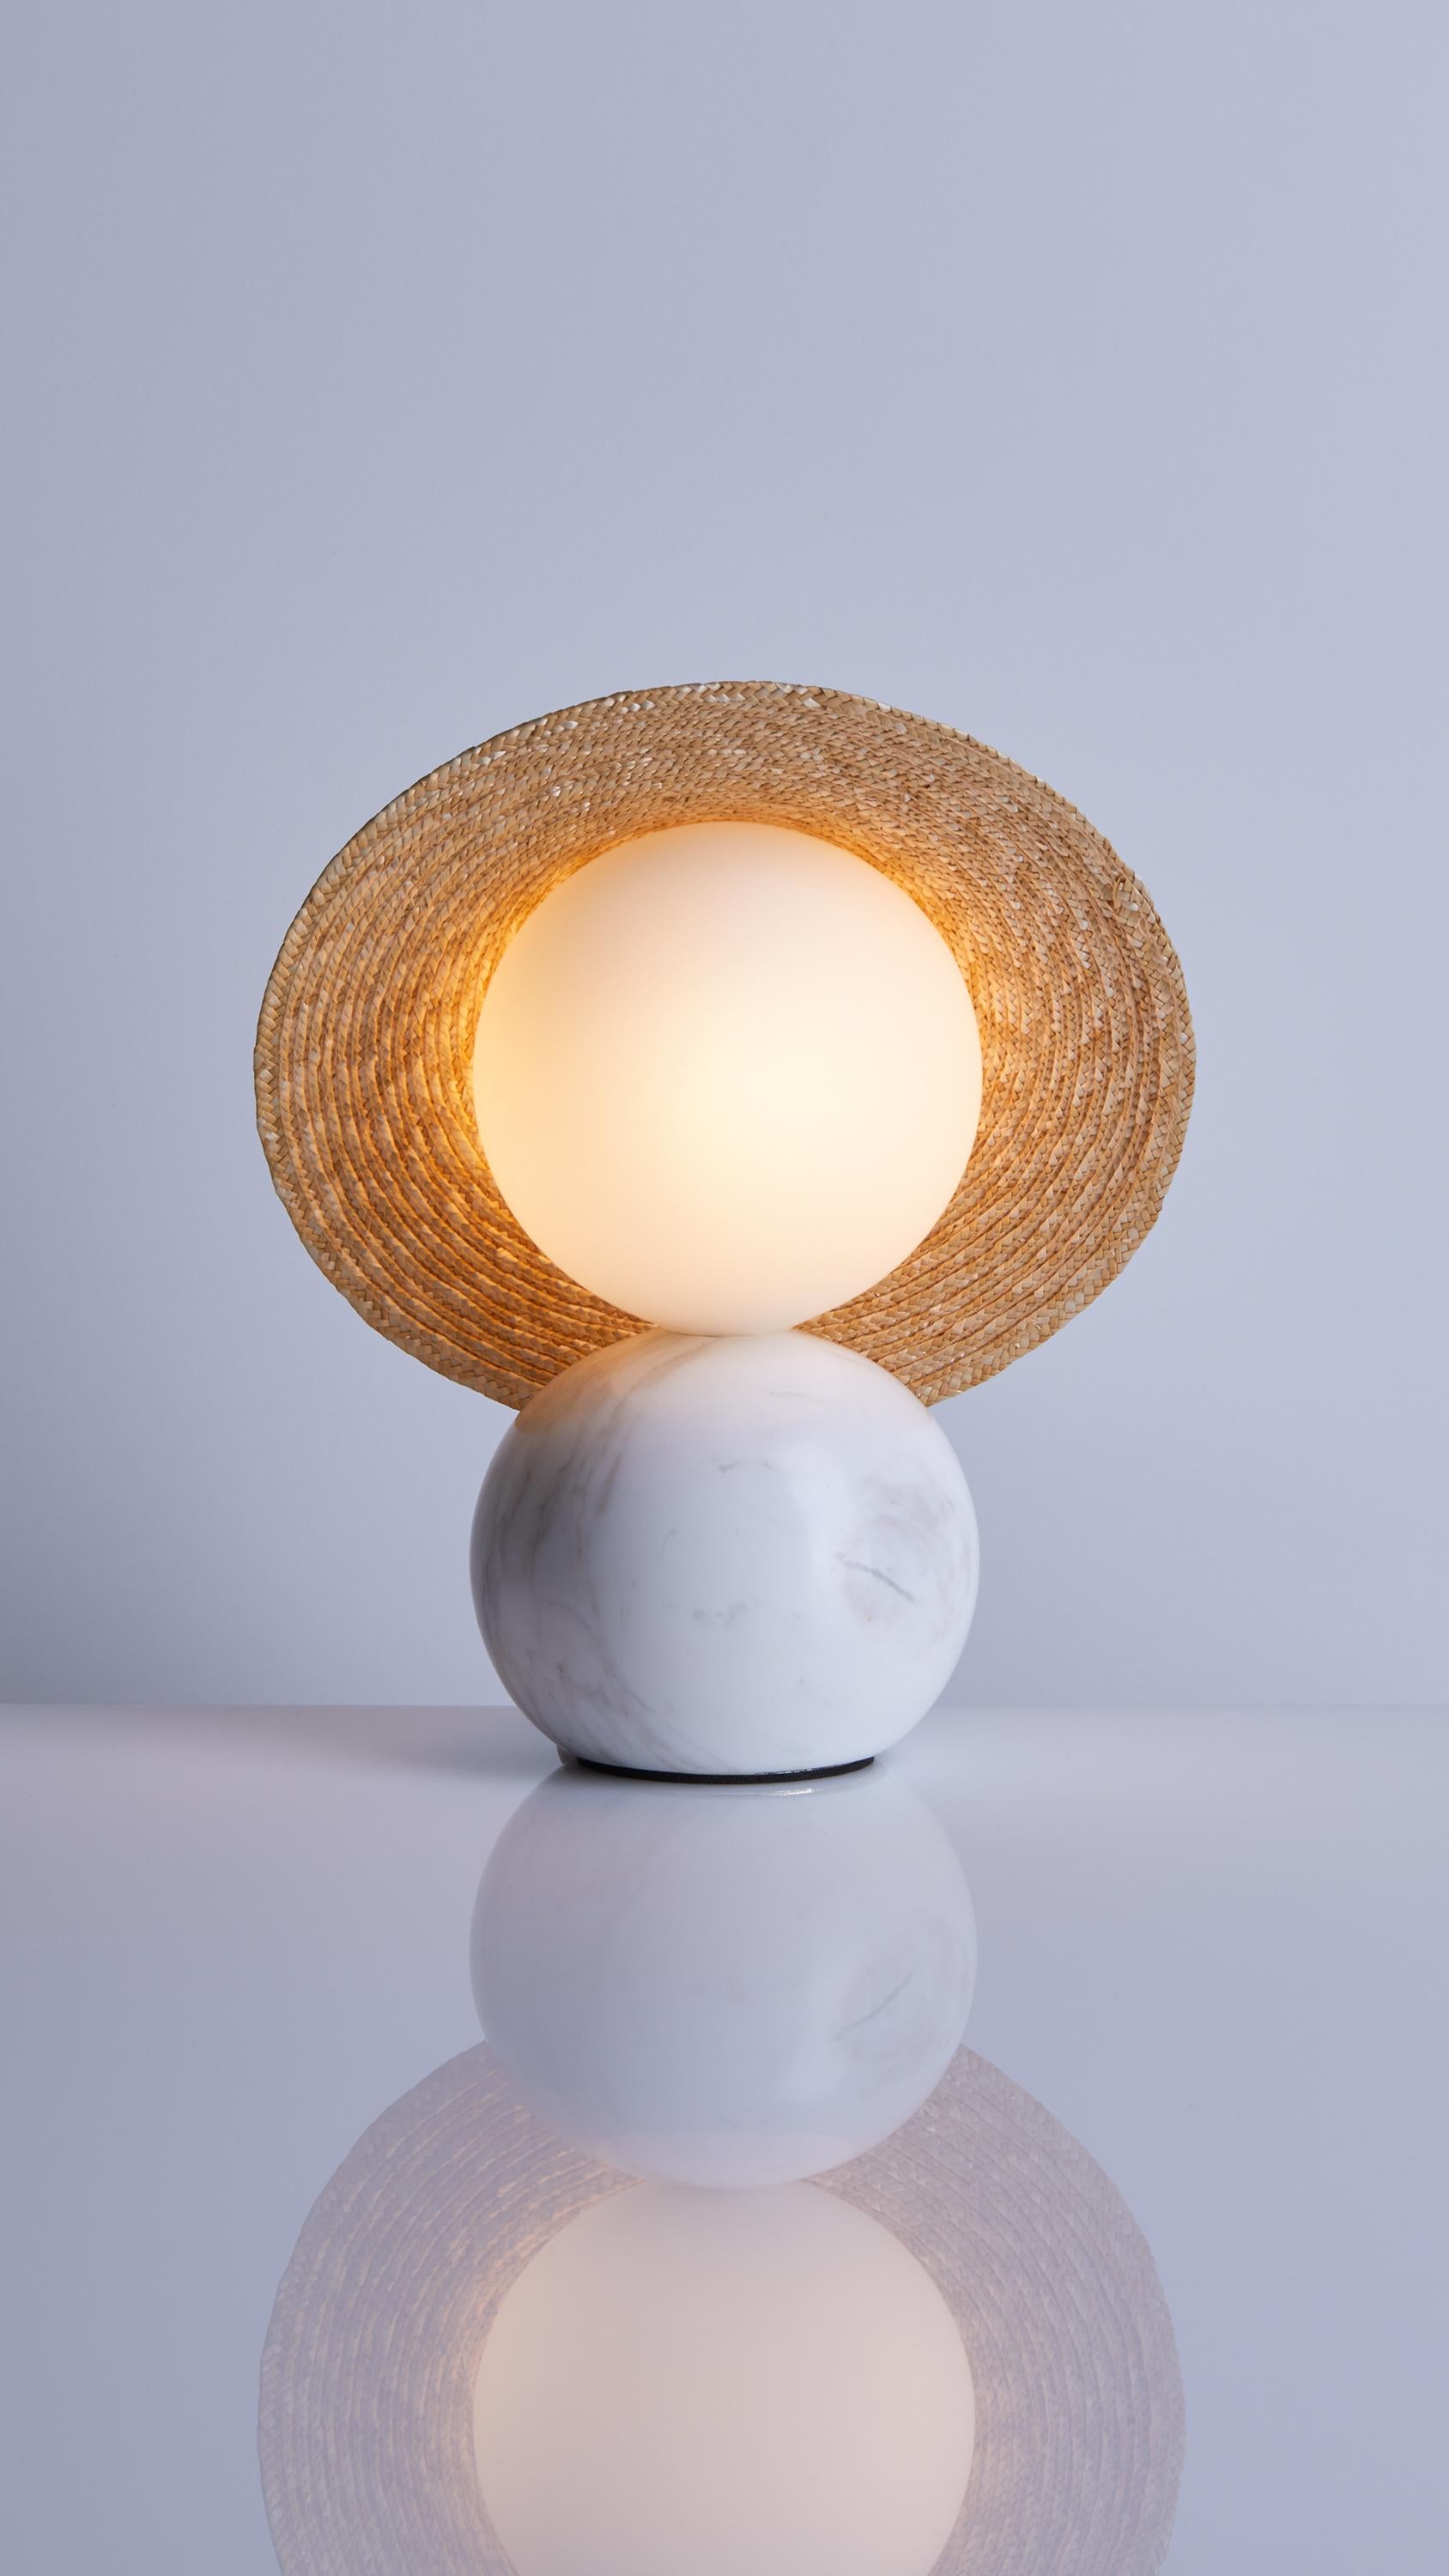 Minimalist Table lamp Théros 0.2 by Aristotelis Barakos, made out of white marble For Sale